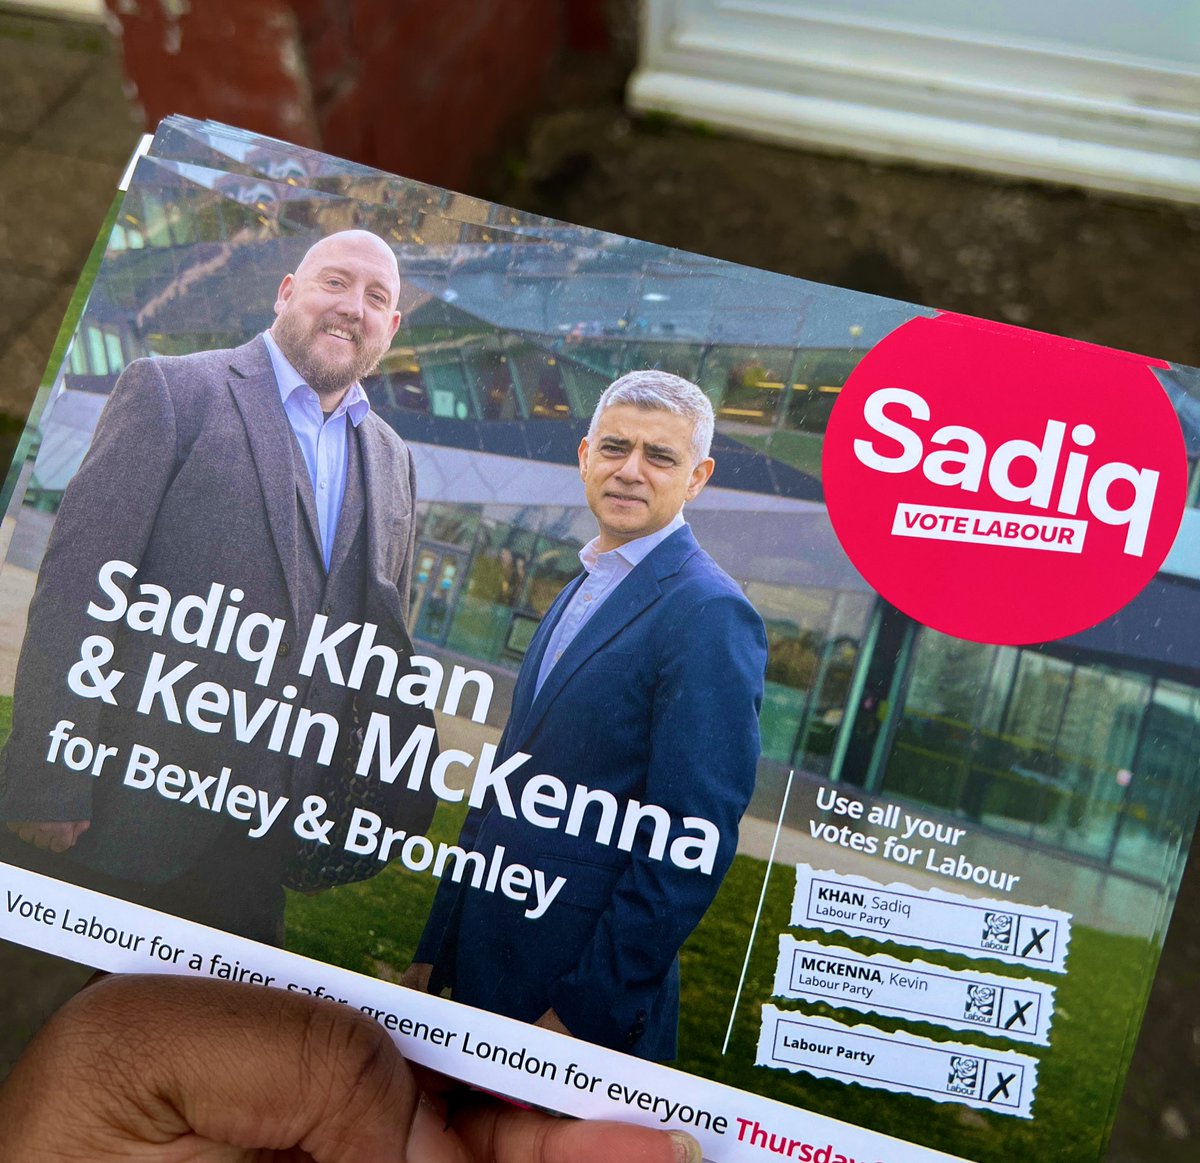 Great to be out campaigning for Sadiq and Kevin this afternoon. Make sure you are registered to vote so that you can head out to vote on the 2nd May! electoralcommission.org.uk/i-am-a/voter/r…